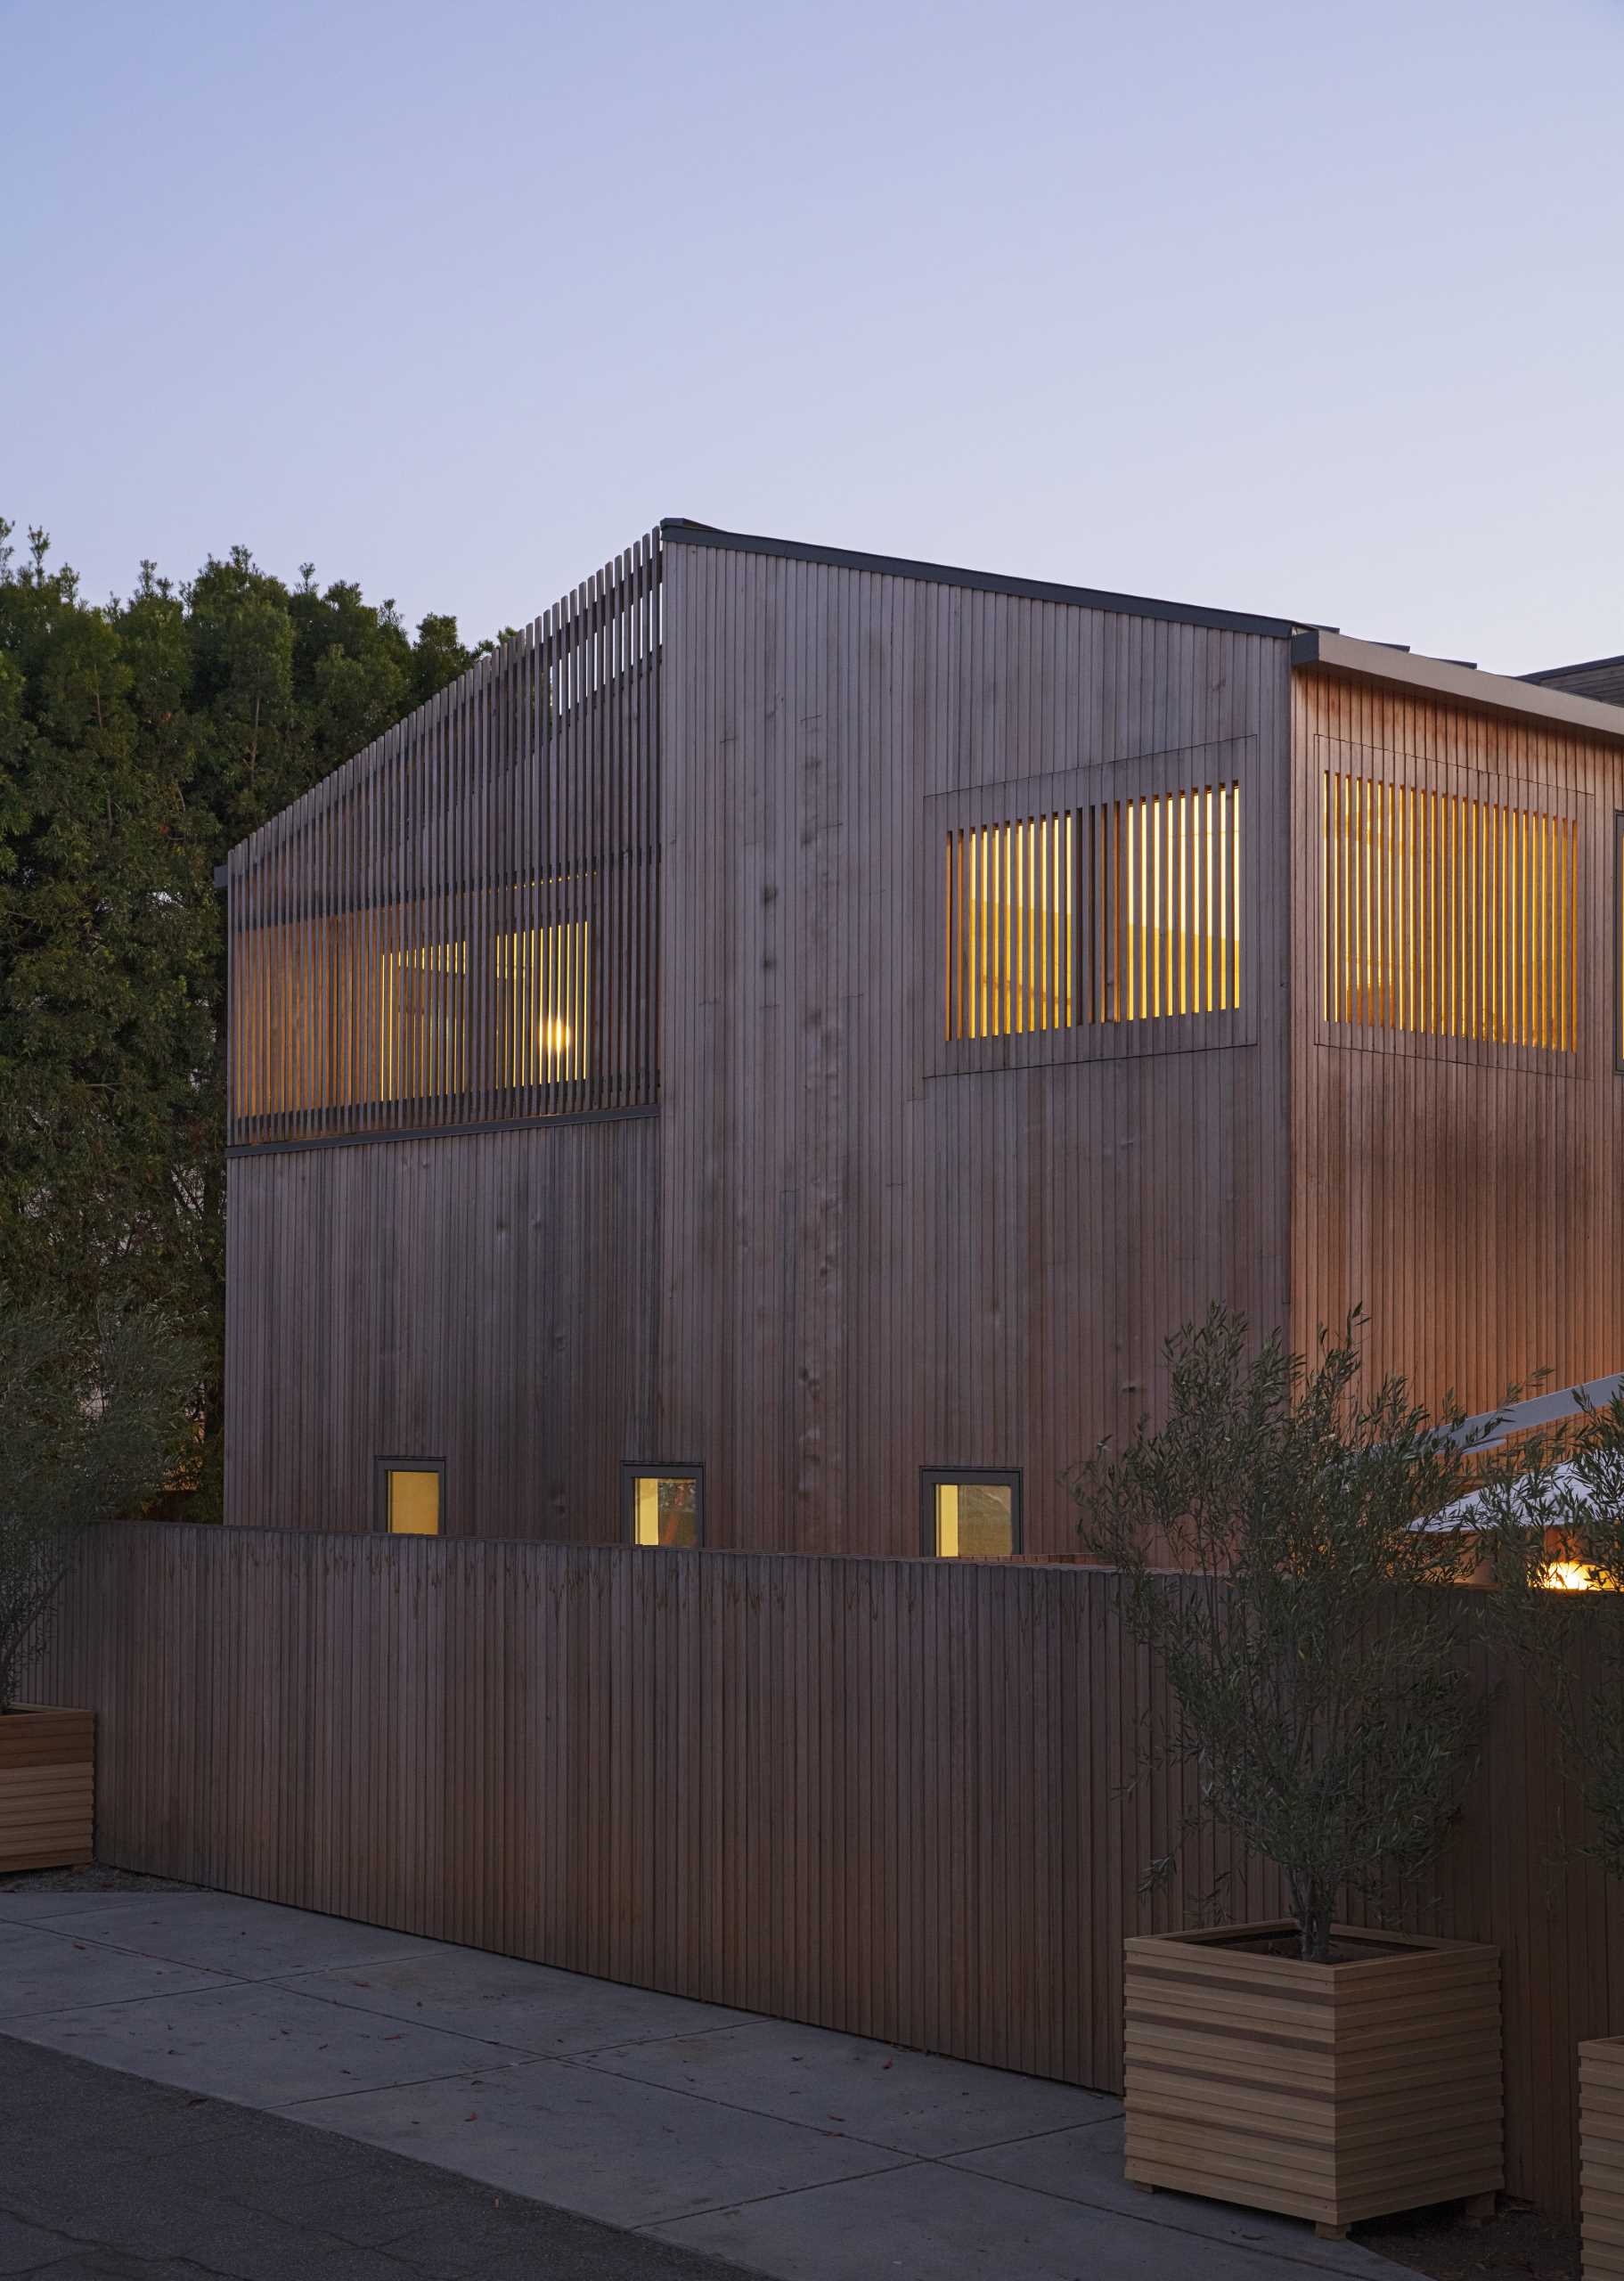 The custom-milled siding of this modern house is Alaskan yellow cedar and was chosen specifically for how it will weather over time, graying out to create a rustic patina reminiscent of the Sea Ranch aesthetic.